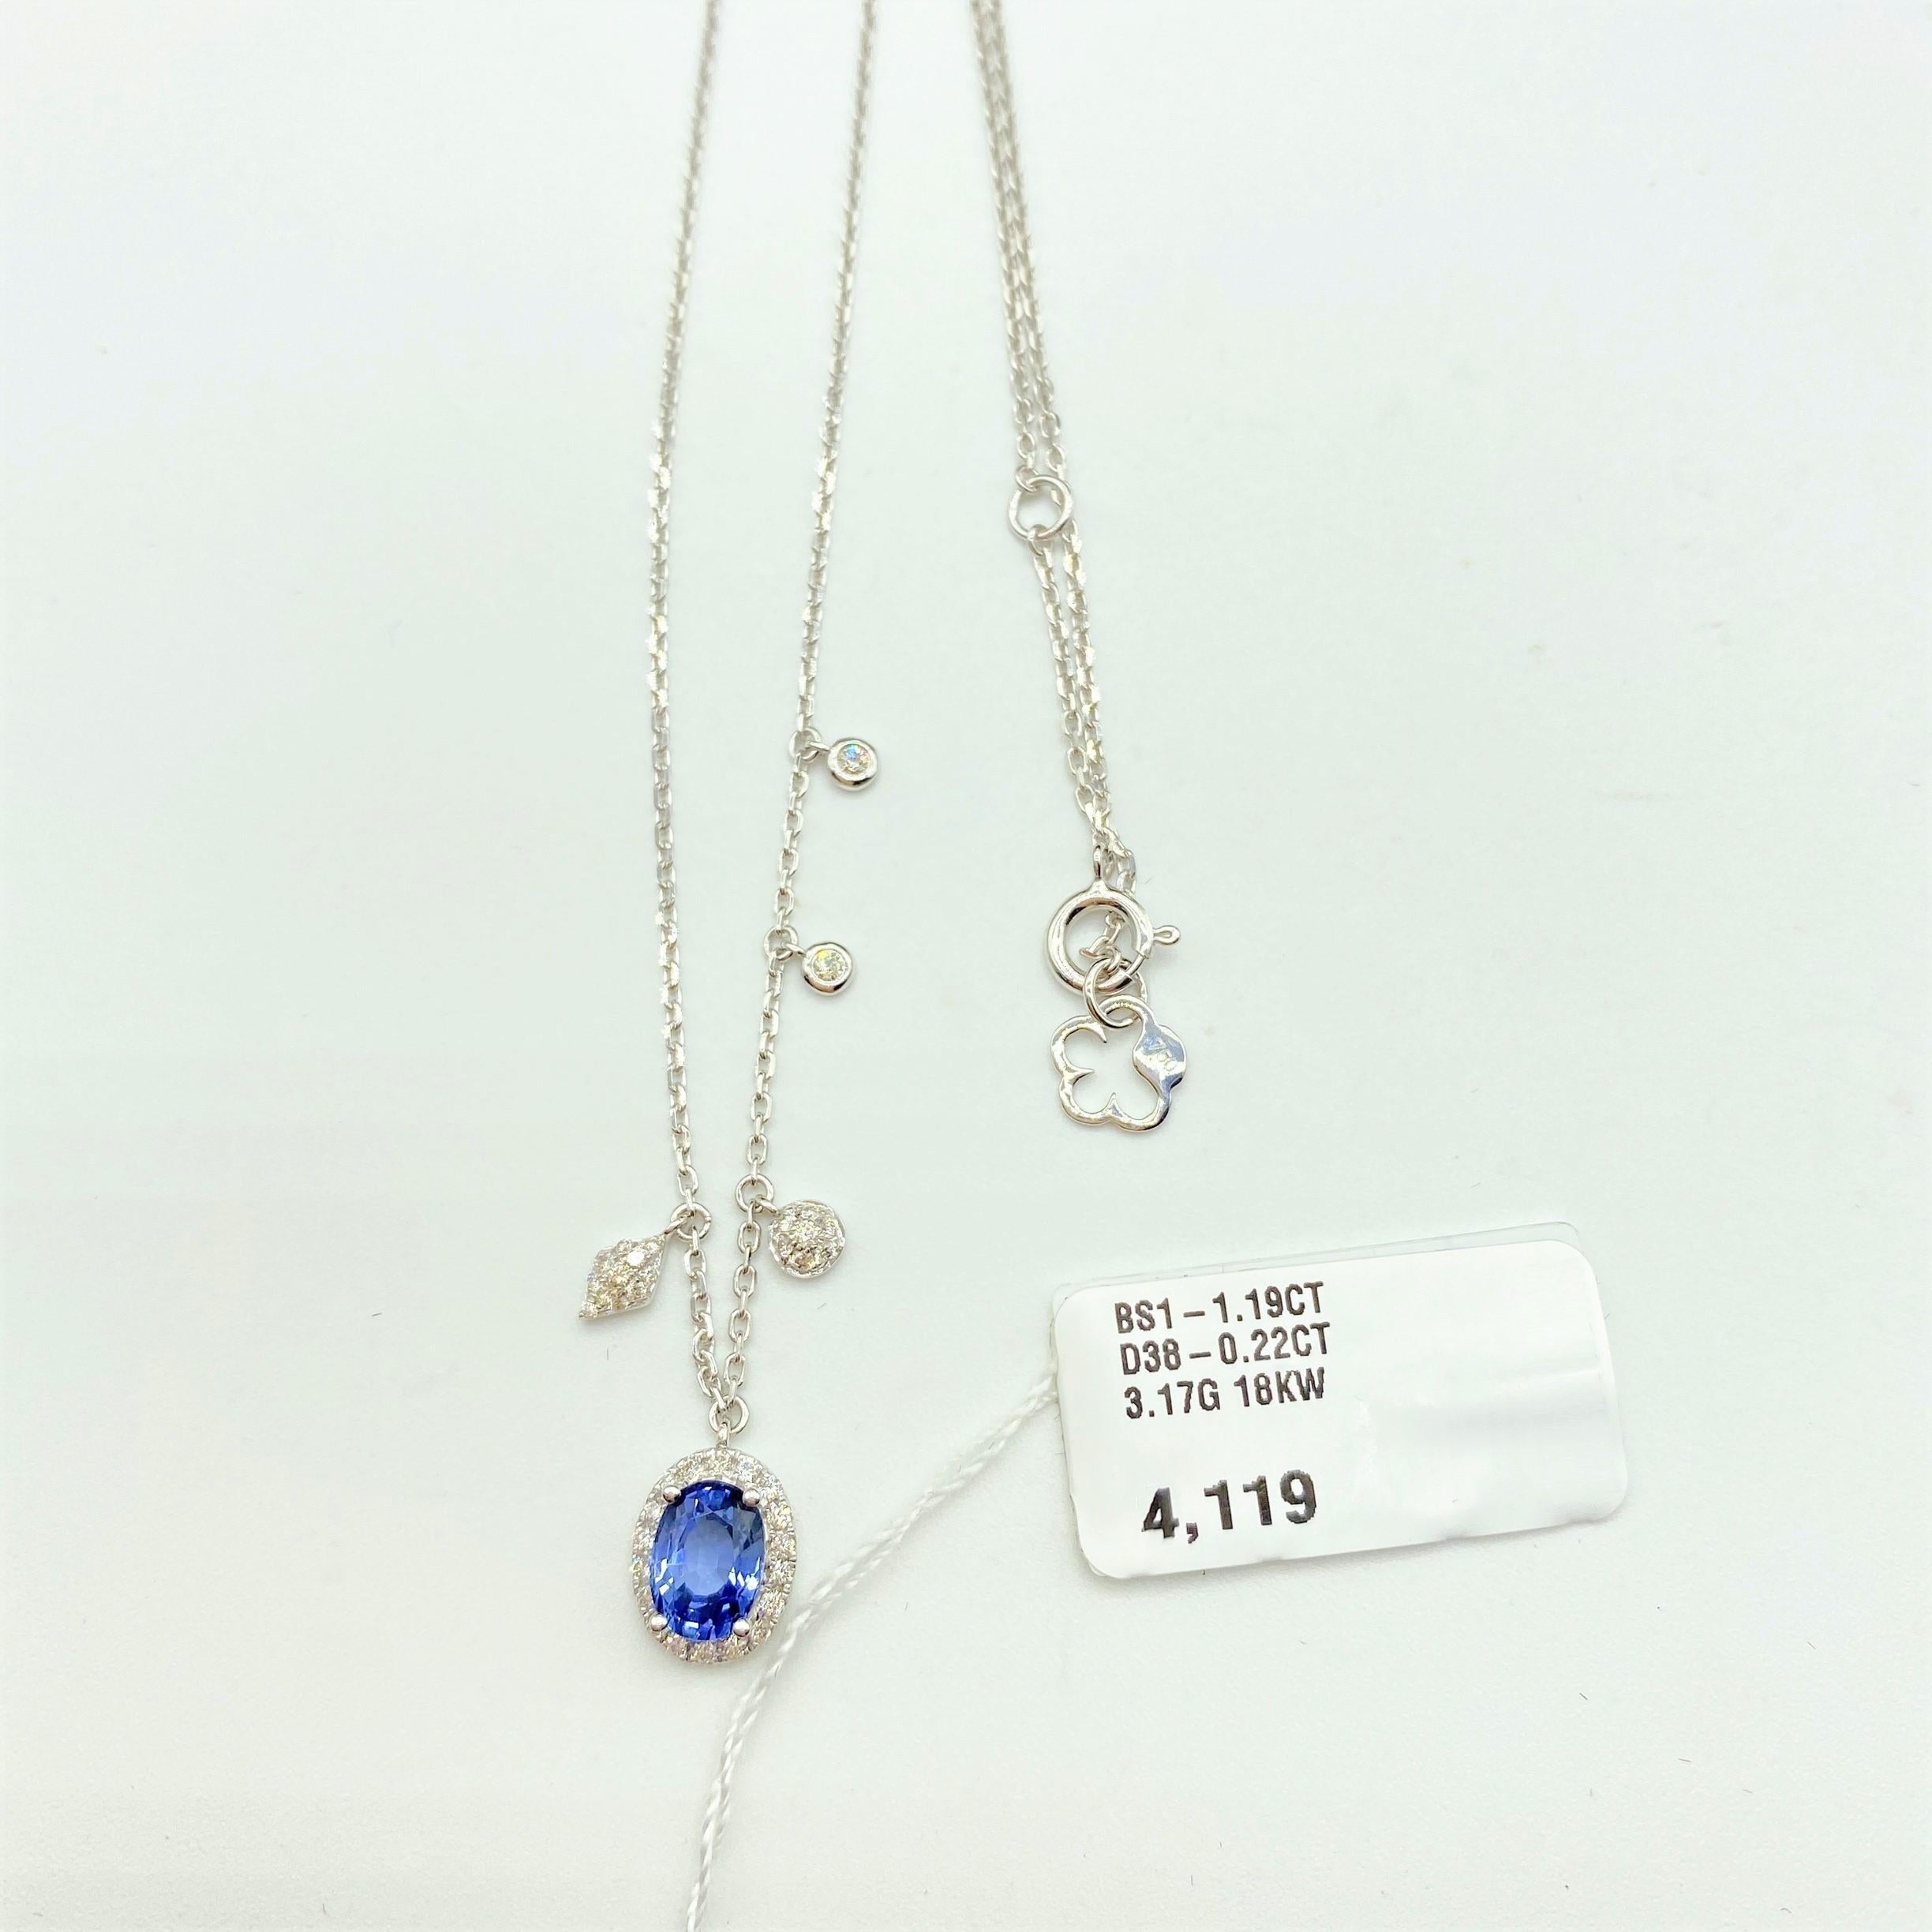 $4, 119 Stunning 18Kt Gold Gorgeous Blue Sapphire and Diamond Pendant Necklace In New Condition For Sale In New York, NY